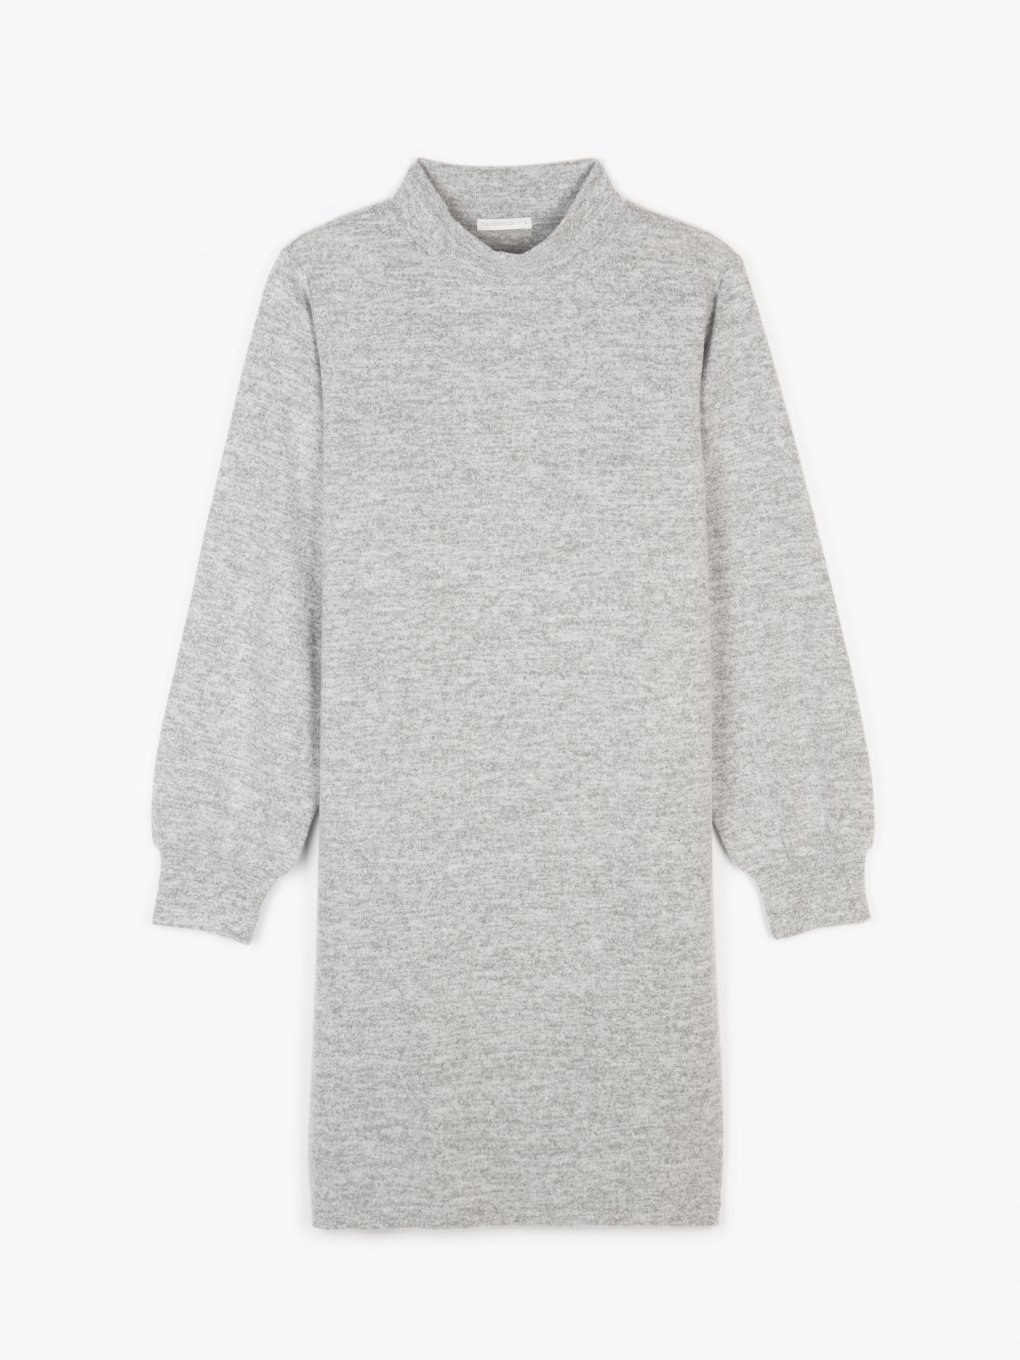 Knitted dress with puffed sleeves